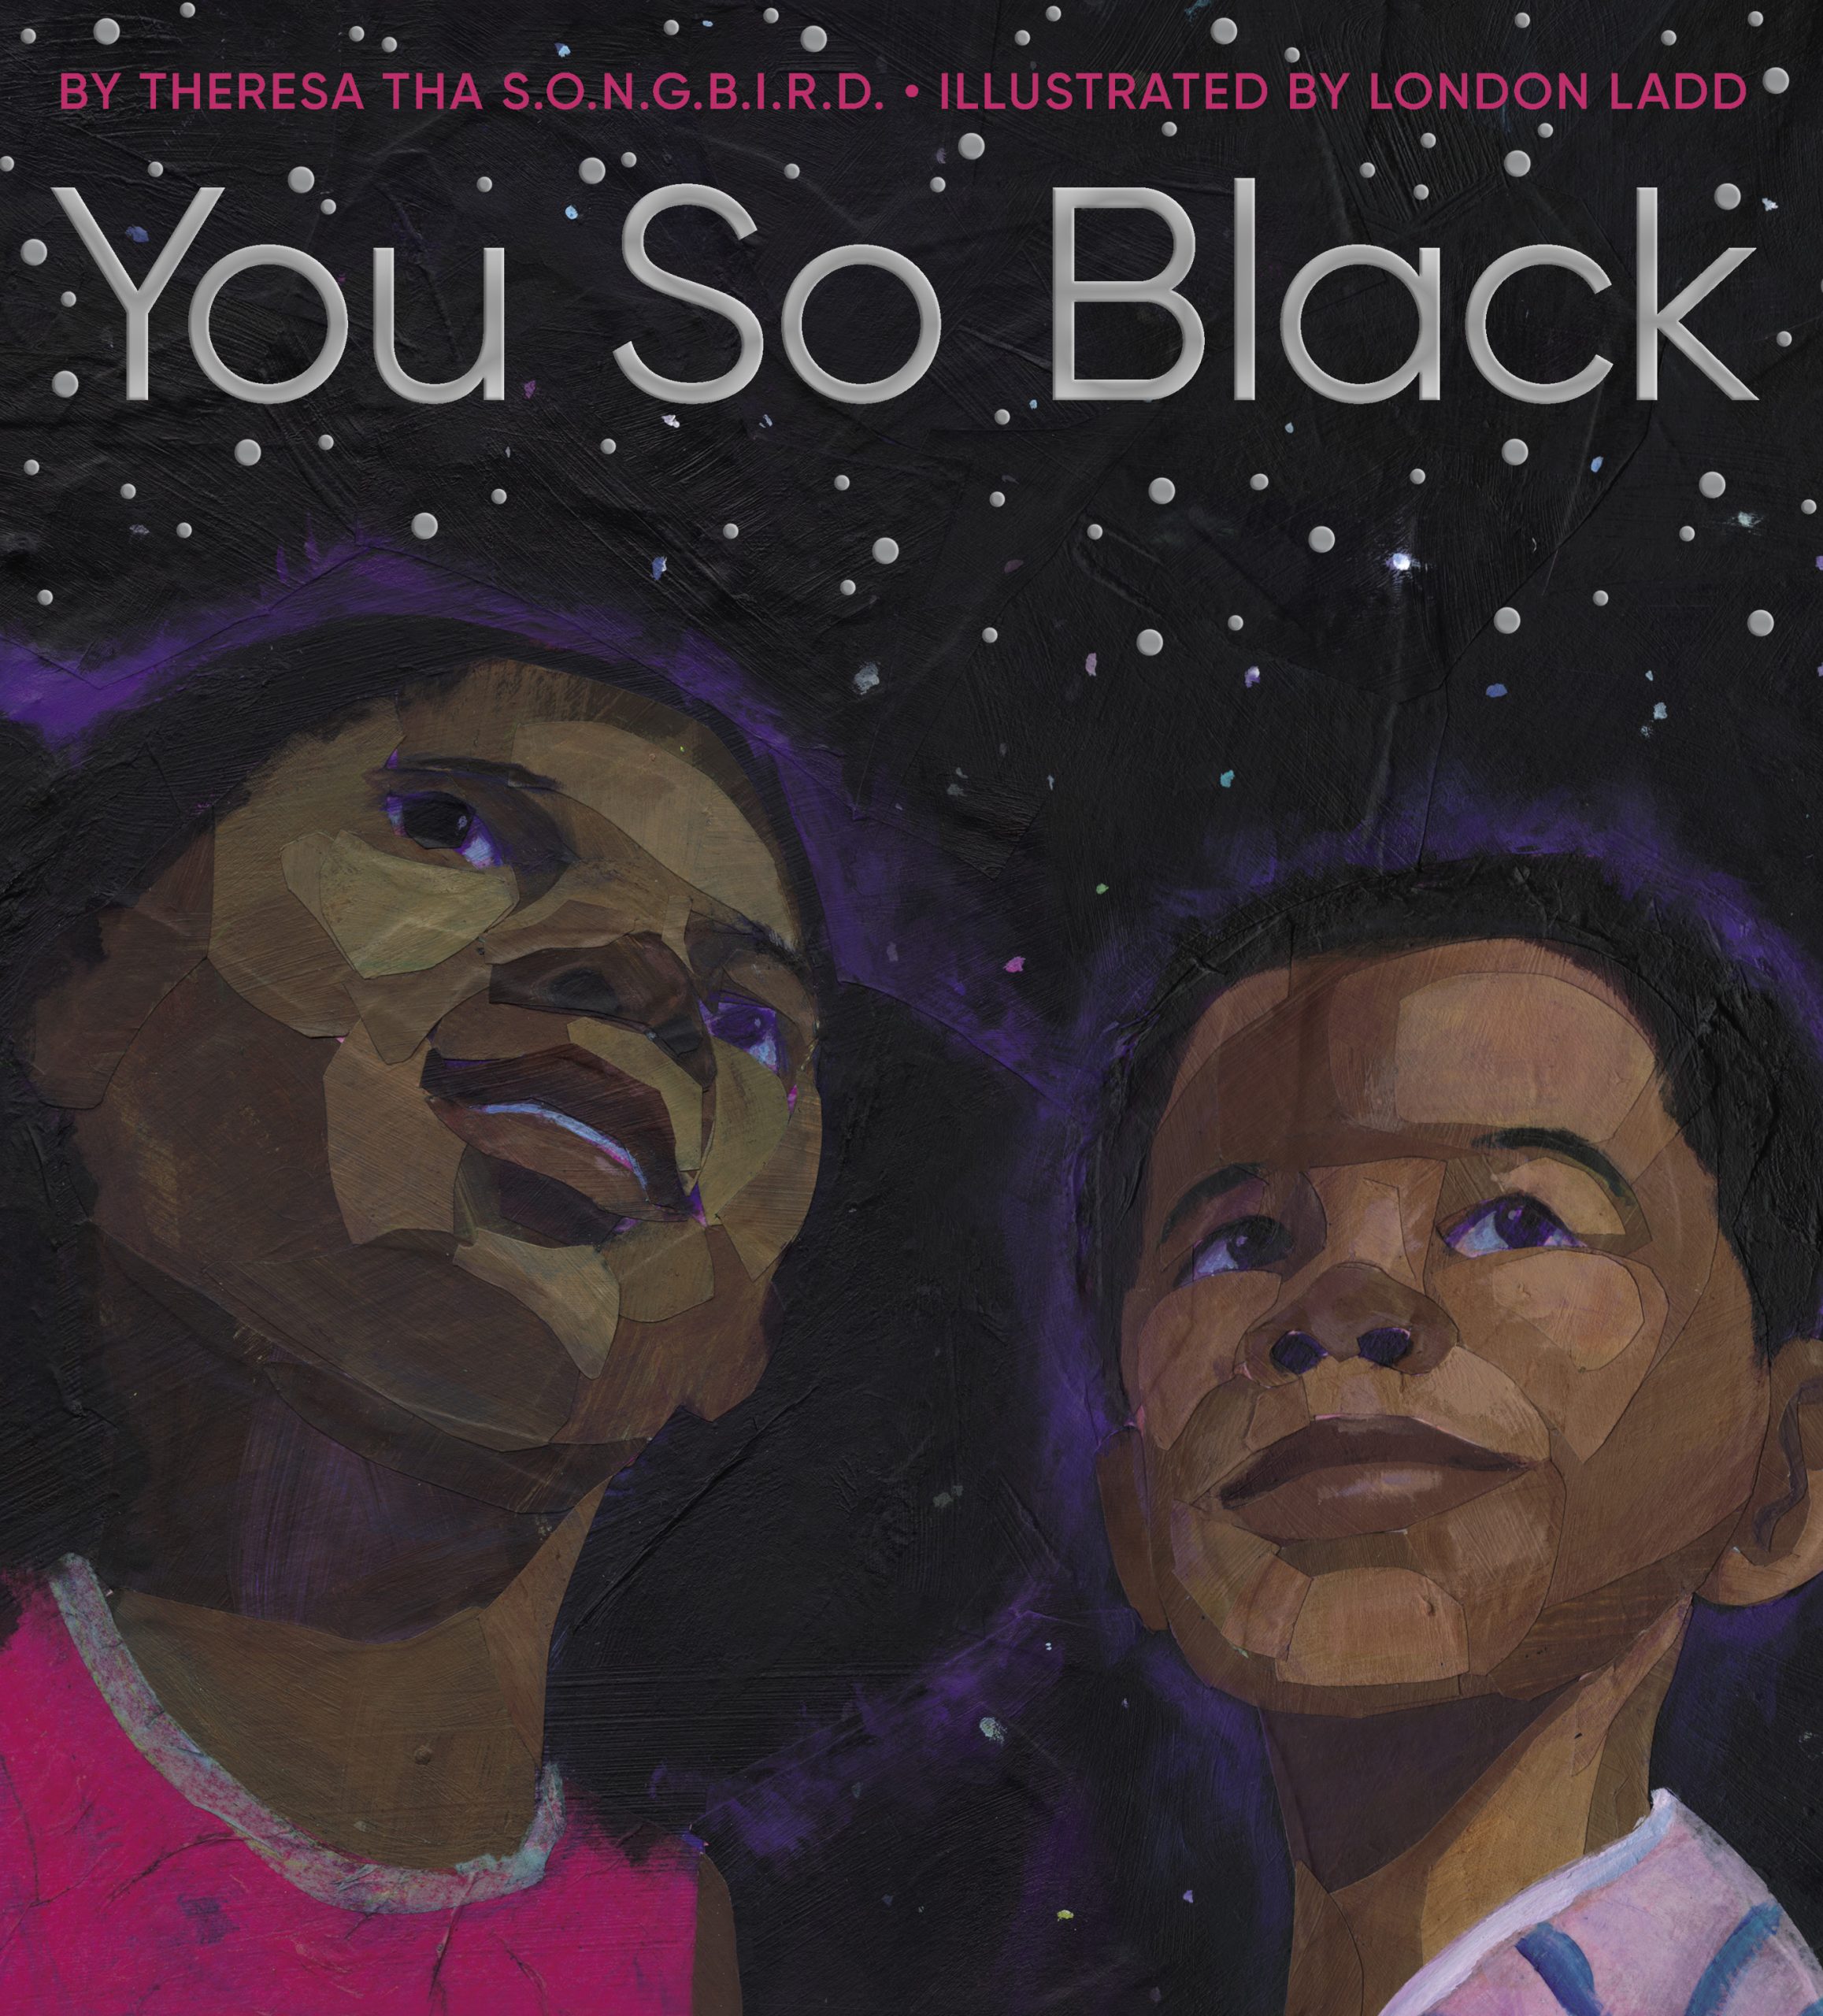 Author Chat With Theresa tha S.O.N.G.B.I.R.D.  (You So Black), Plus Giveaway! ~ US Only, No P.O Boxes!